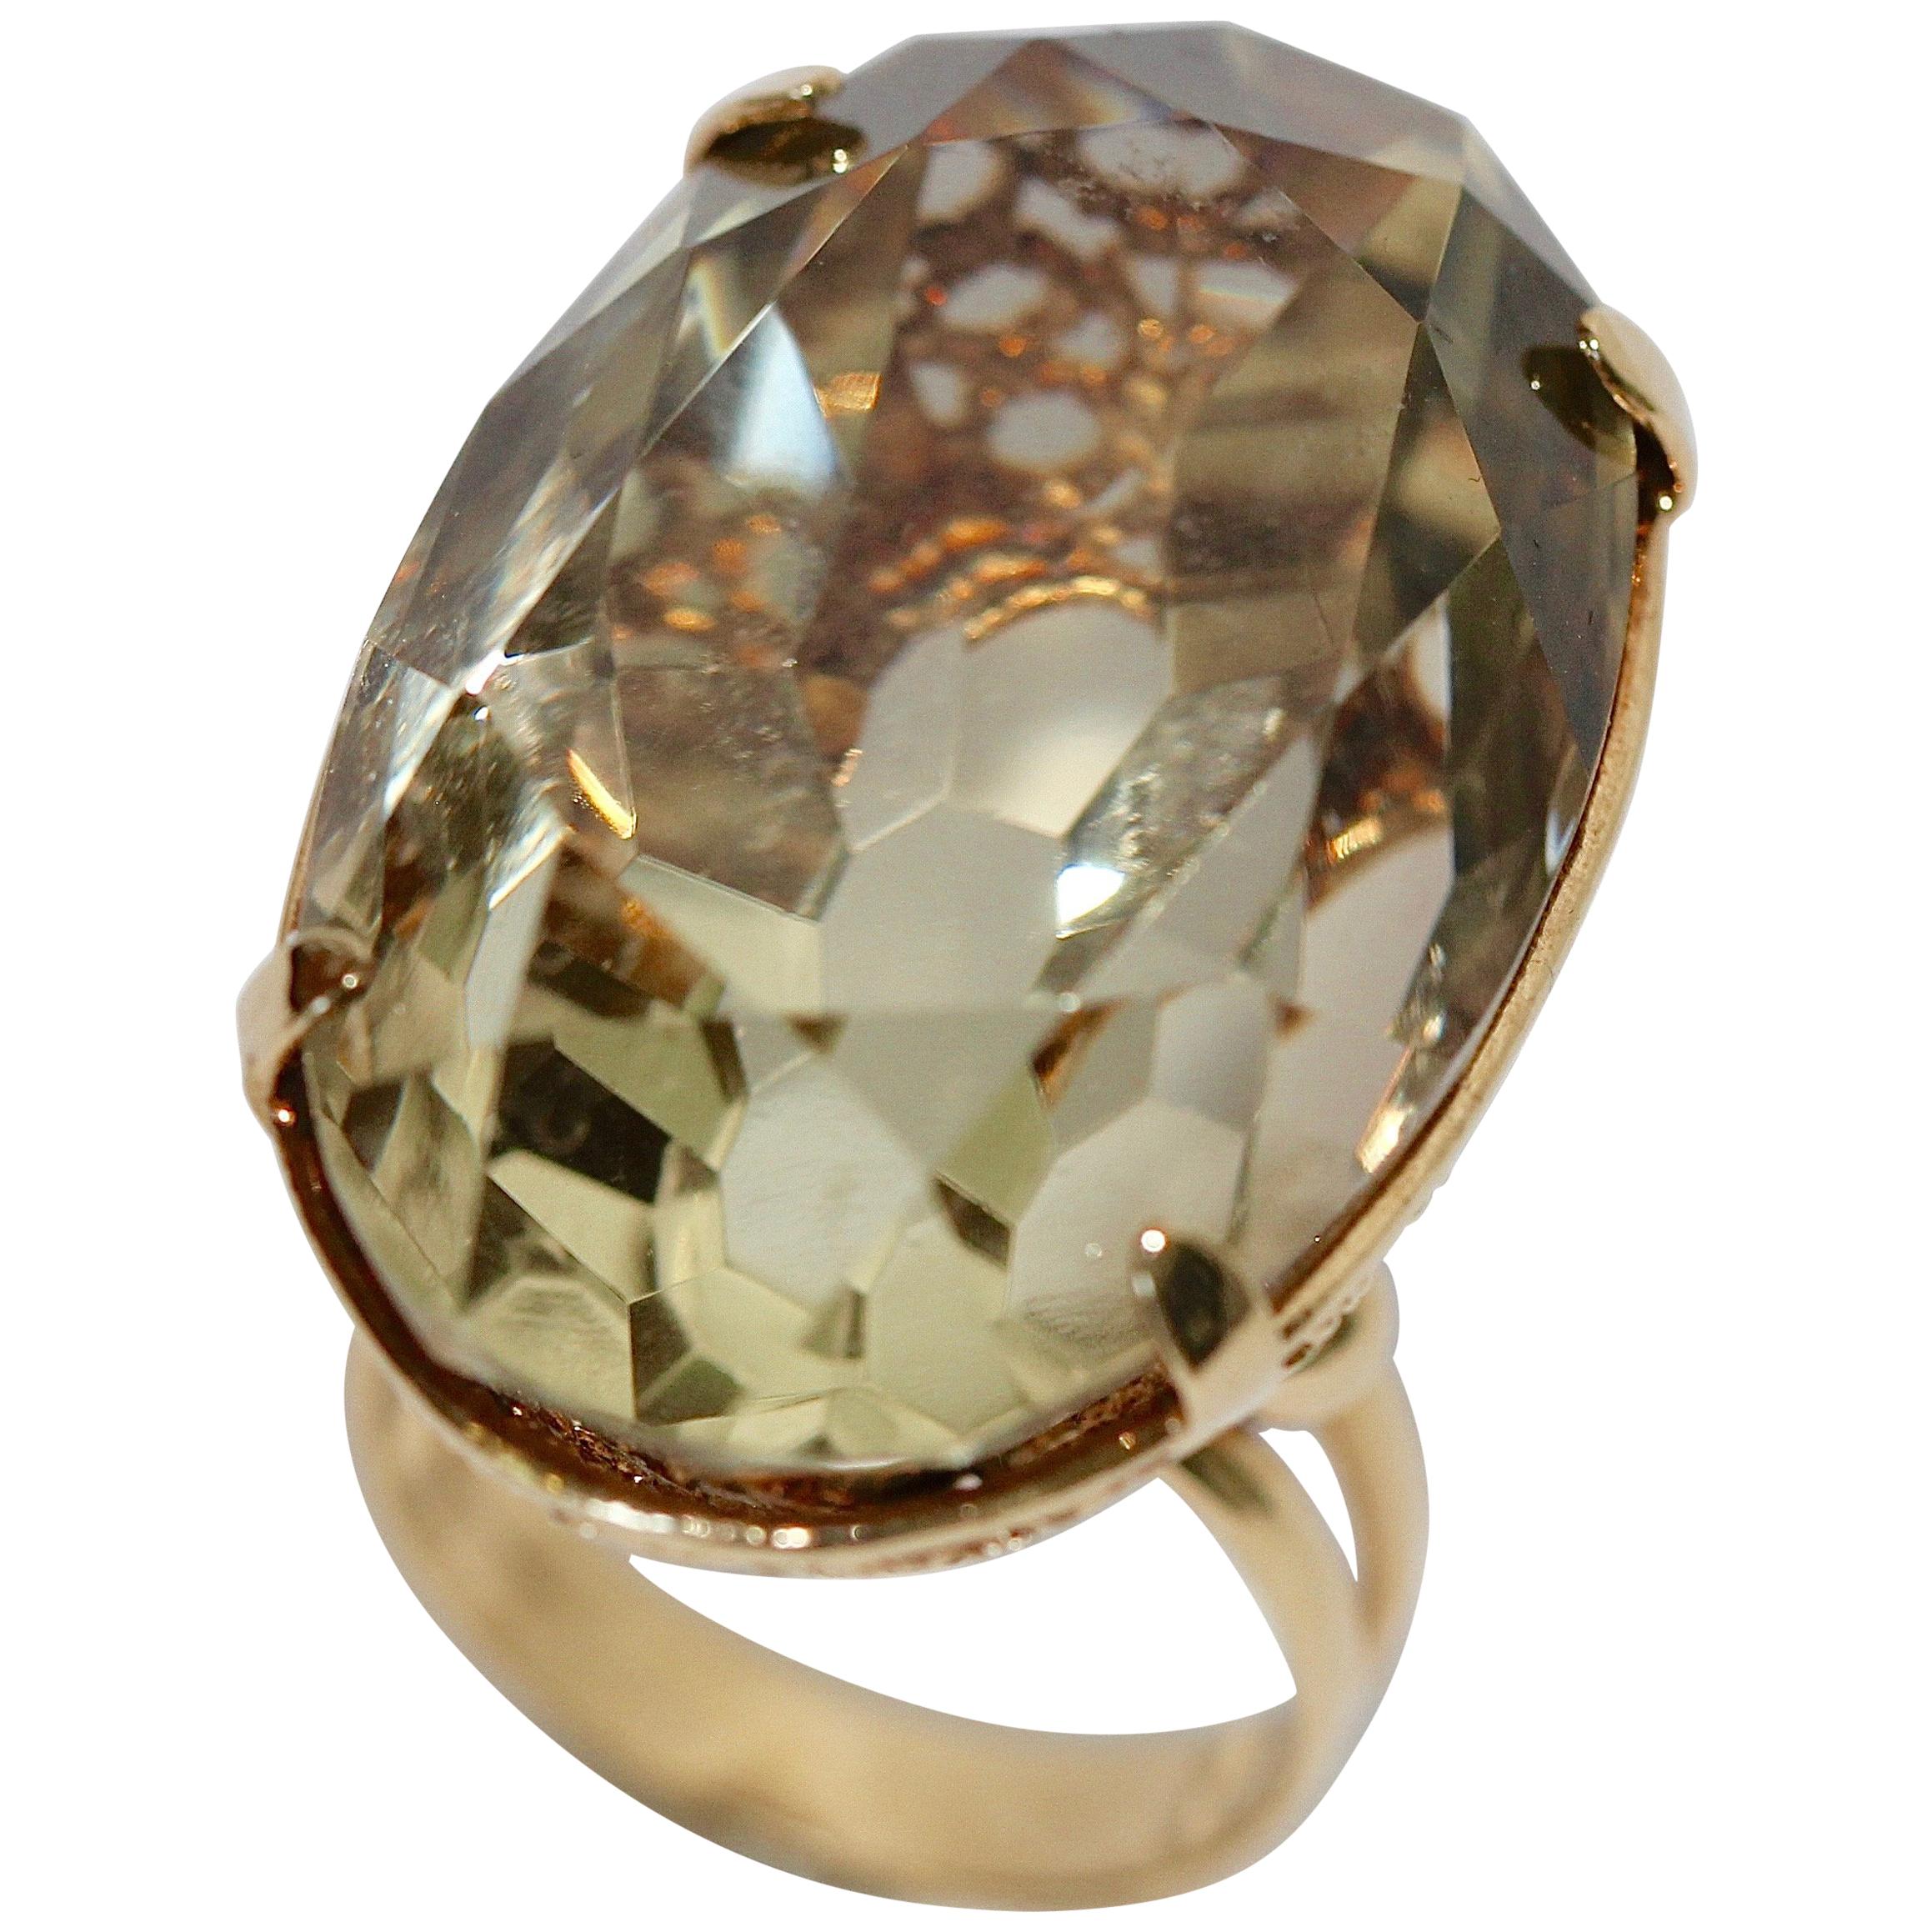 14 Karat Yellow Gold Ring with Large, Faceted, Bright Citrine For Sale